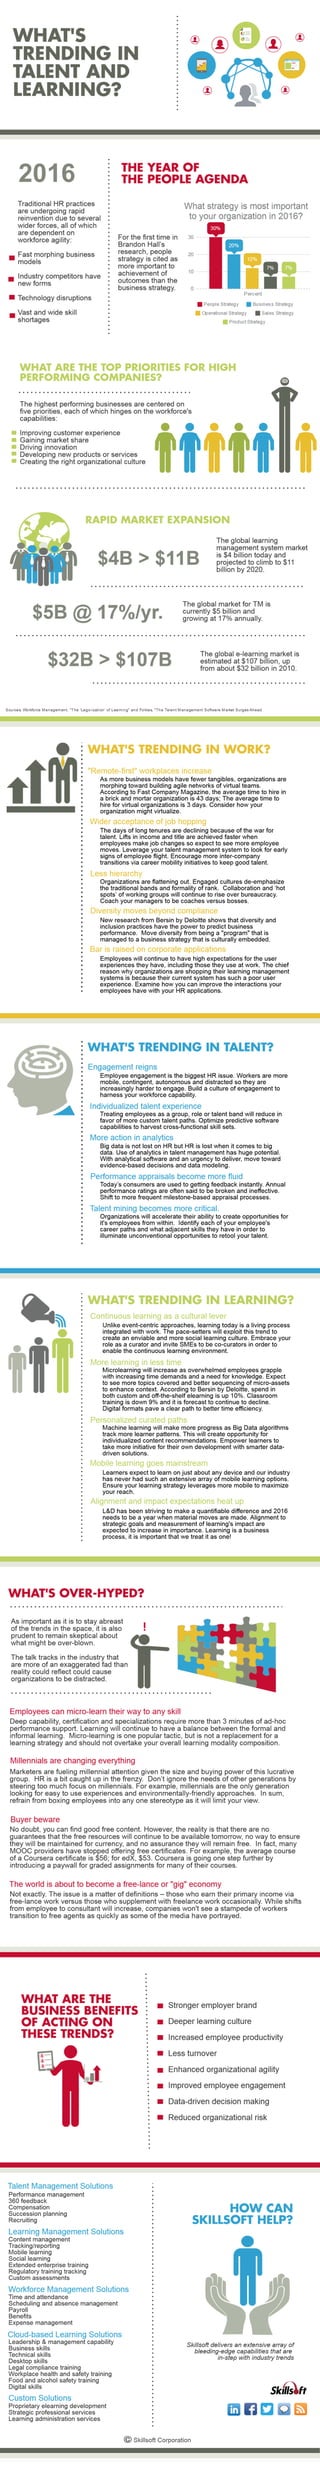 What's Trending in Talent and Learning for 2016? Slide 1